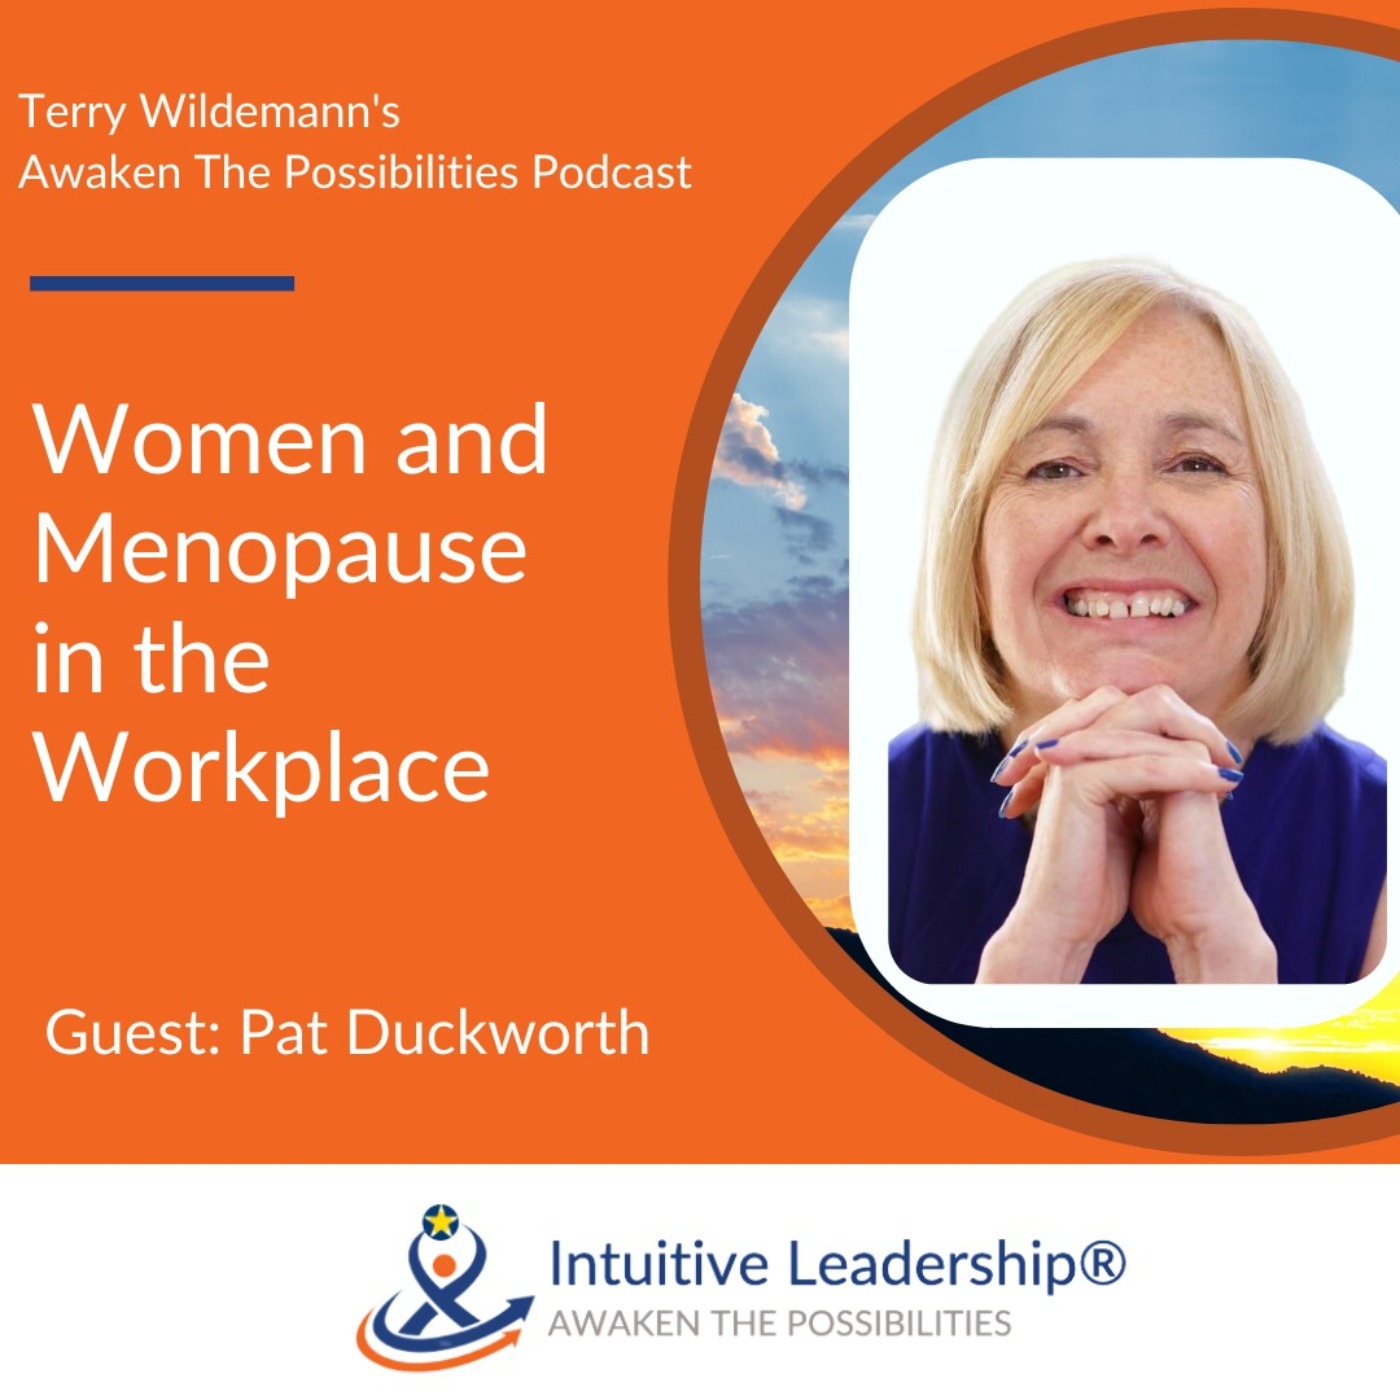 Awaken The Possibilities: Women and Menopause in the Workplace